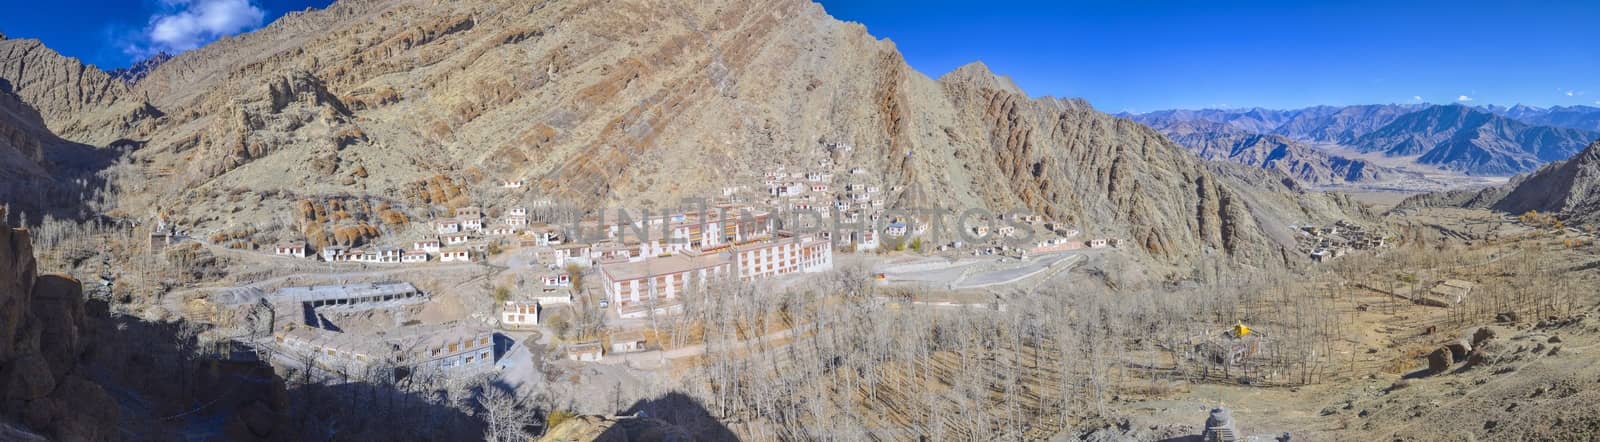 Picturesque view of shrines and temples of village in Ladakh region, India